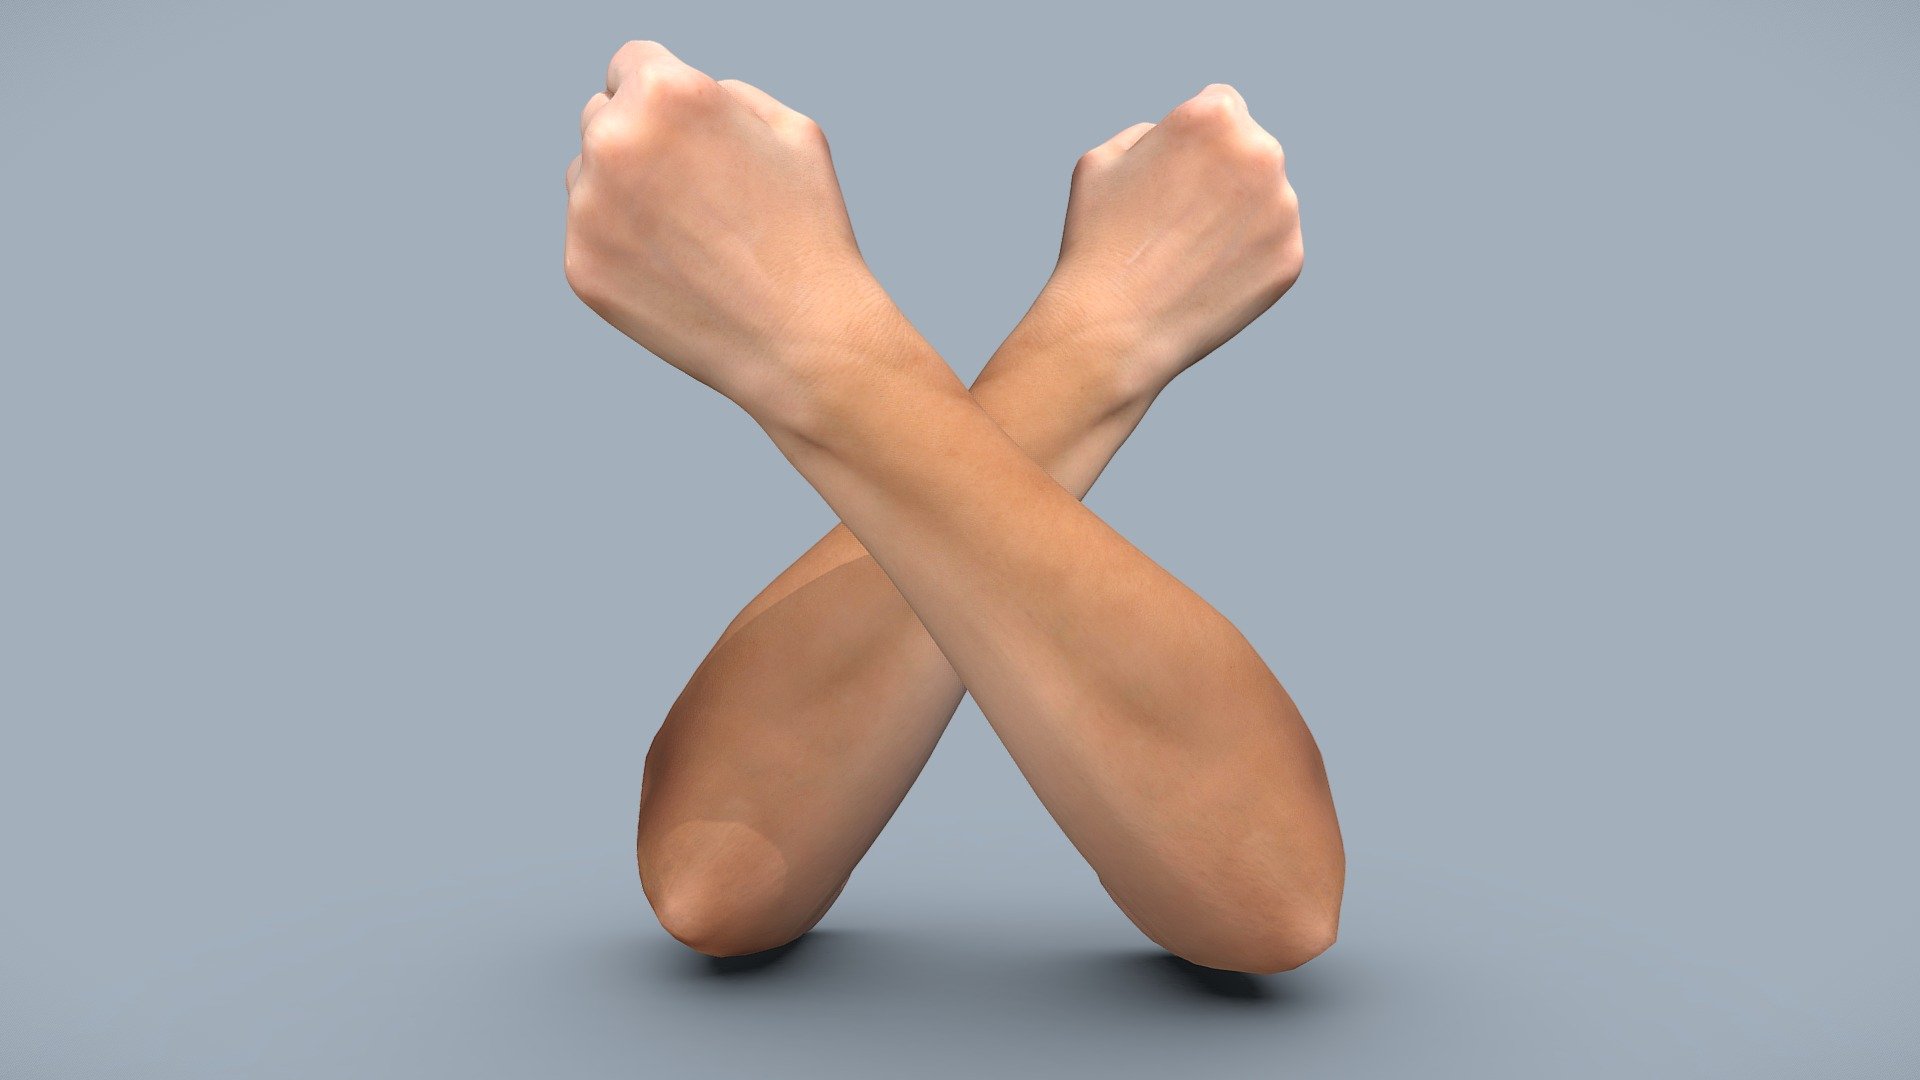 40 years old female forearms with hands closed to a fist.

Model includes 8k diffuse map, 4k normals (suggested use value 0.1 - 0.25), 4k Ambient occlusion map

Photos taken with A7Riv.

Processed with Metashape + Blender + Wrap3d - Female forearms - Buy Royalty Free 3D model by Lassi Kaukonen (@thesidekick) 3d model